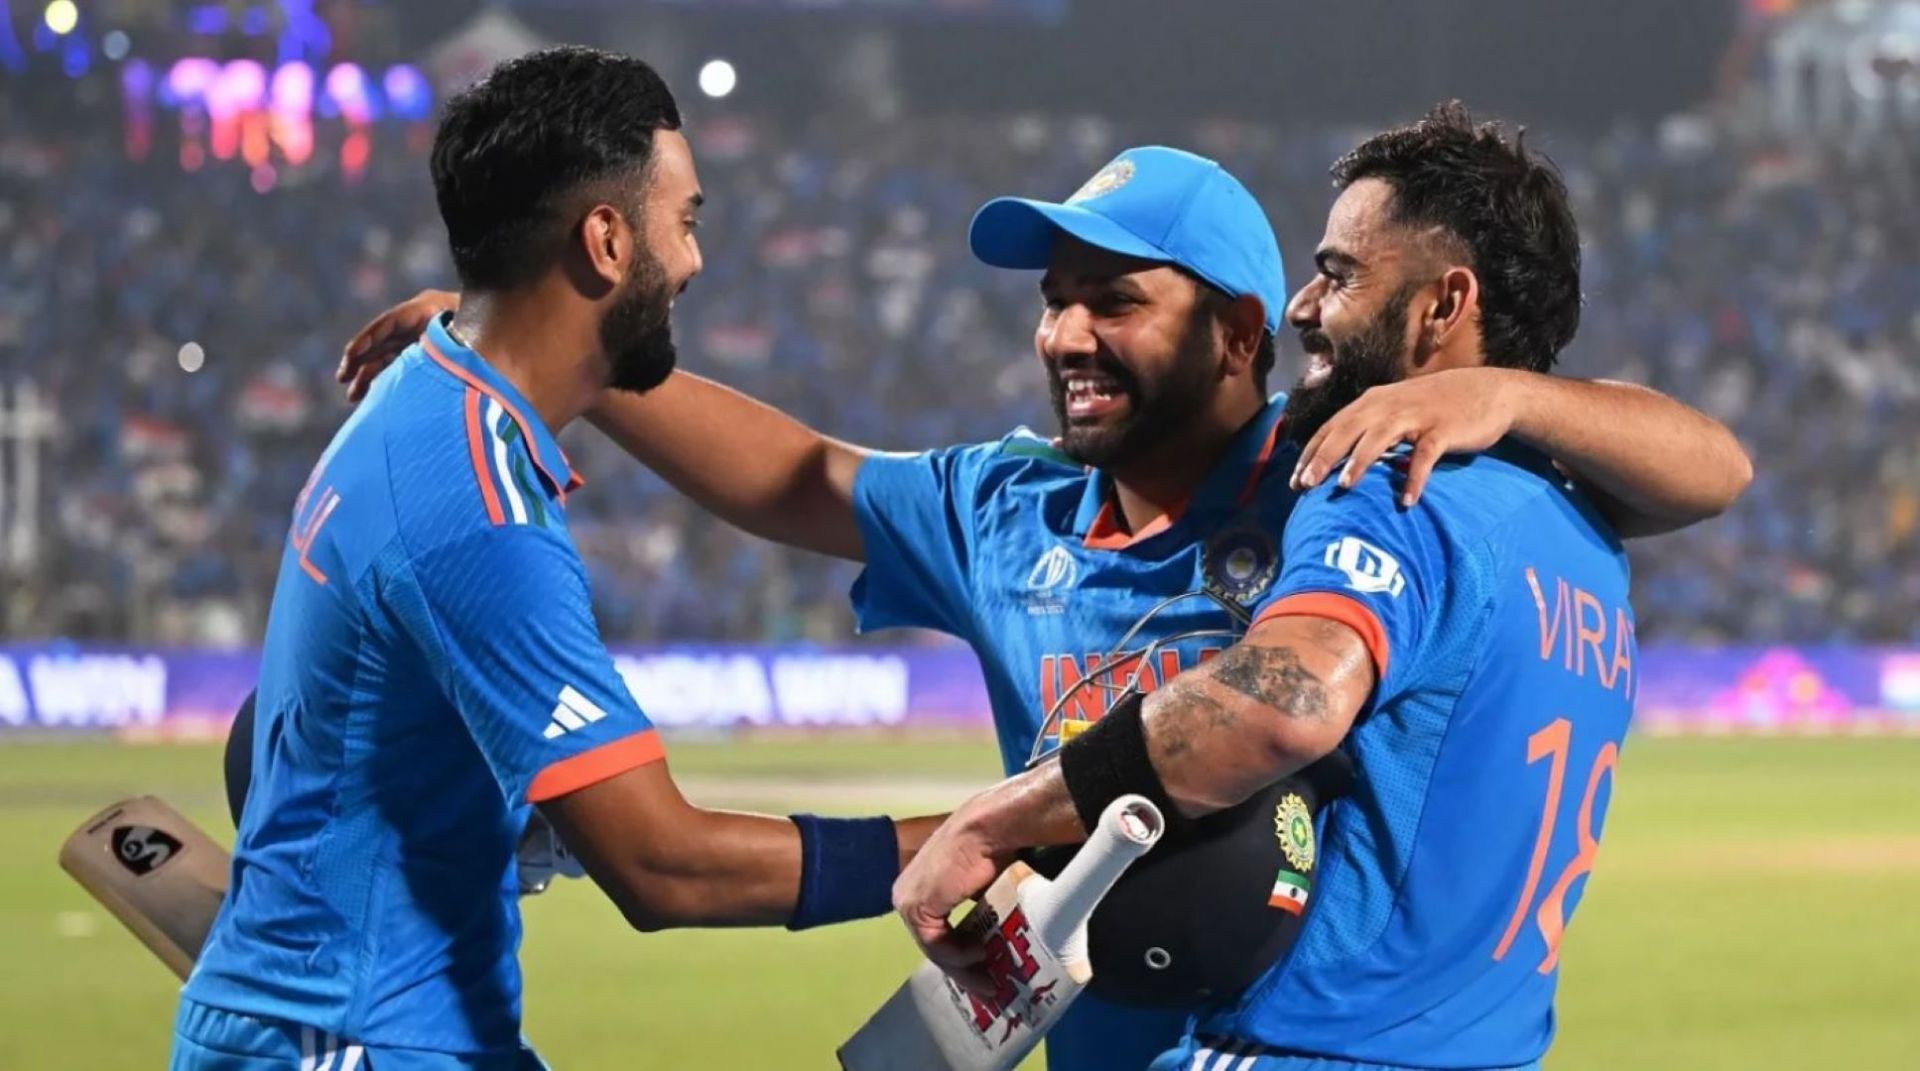 Team India have been in rampaging form in the opening four games of the World Cup